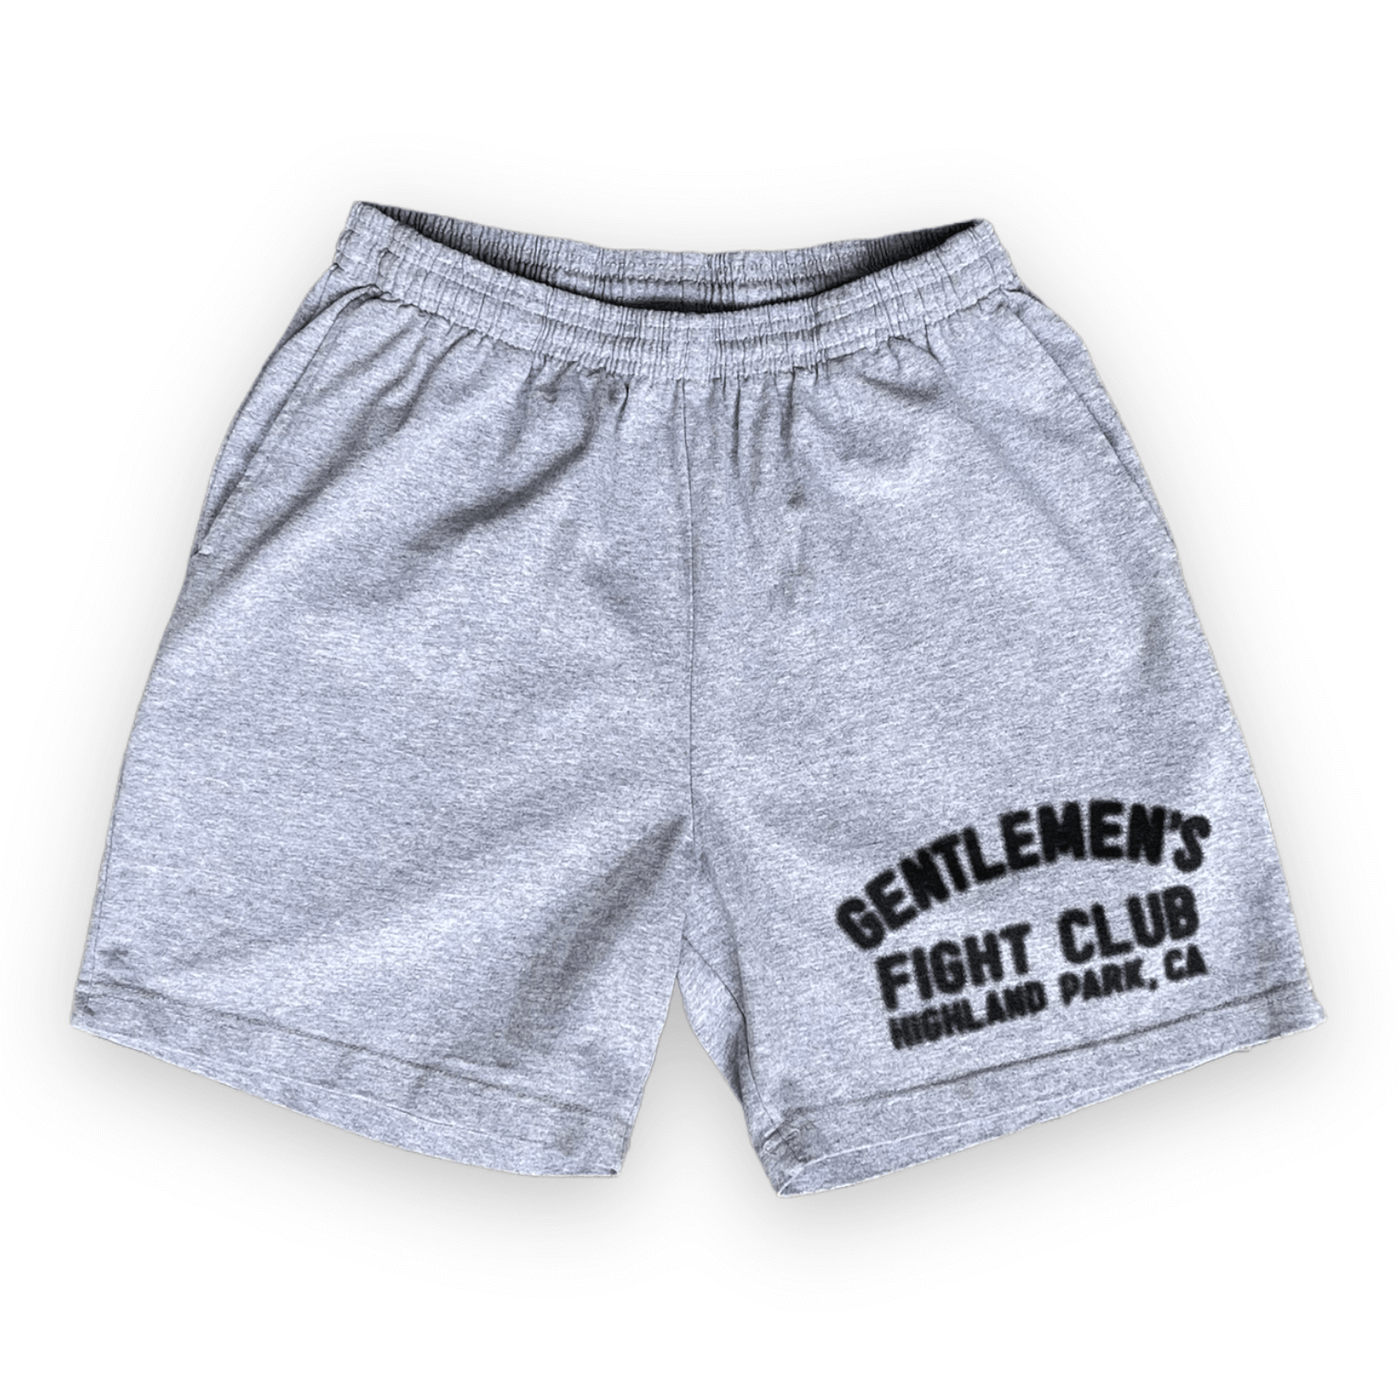 Athletic Grey shorts with elastic waist and blurry print that reads "Gentlemen's Fight Club Highland Park, CA"